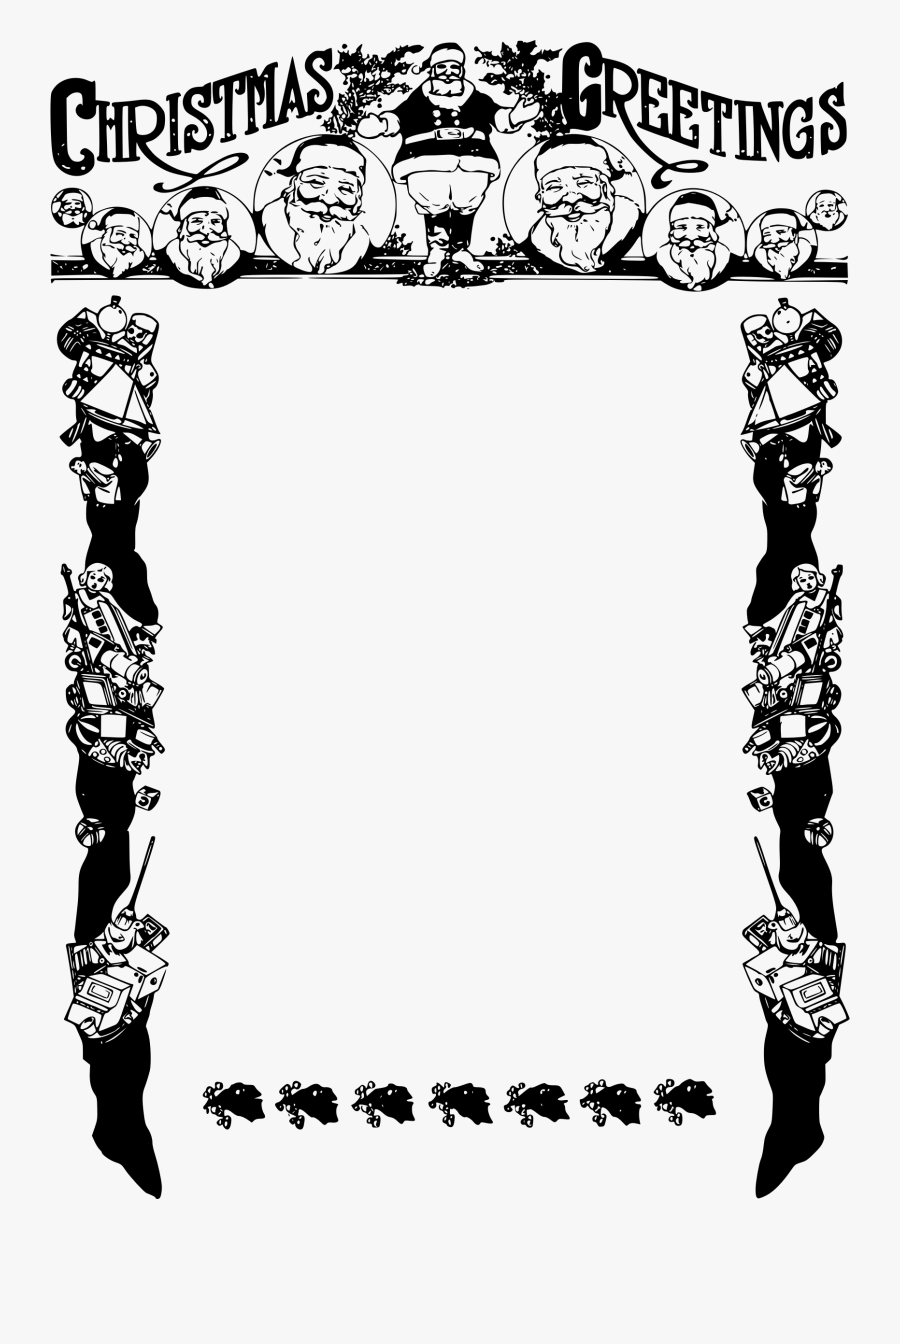 Xmas Greetings Frame Clip Arts - Trippy Frame Png, Transparent Clipart